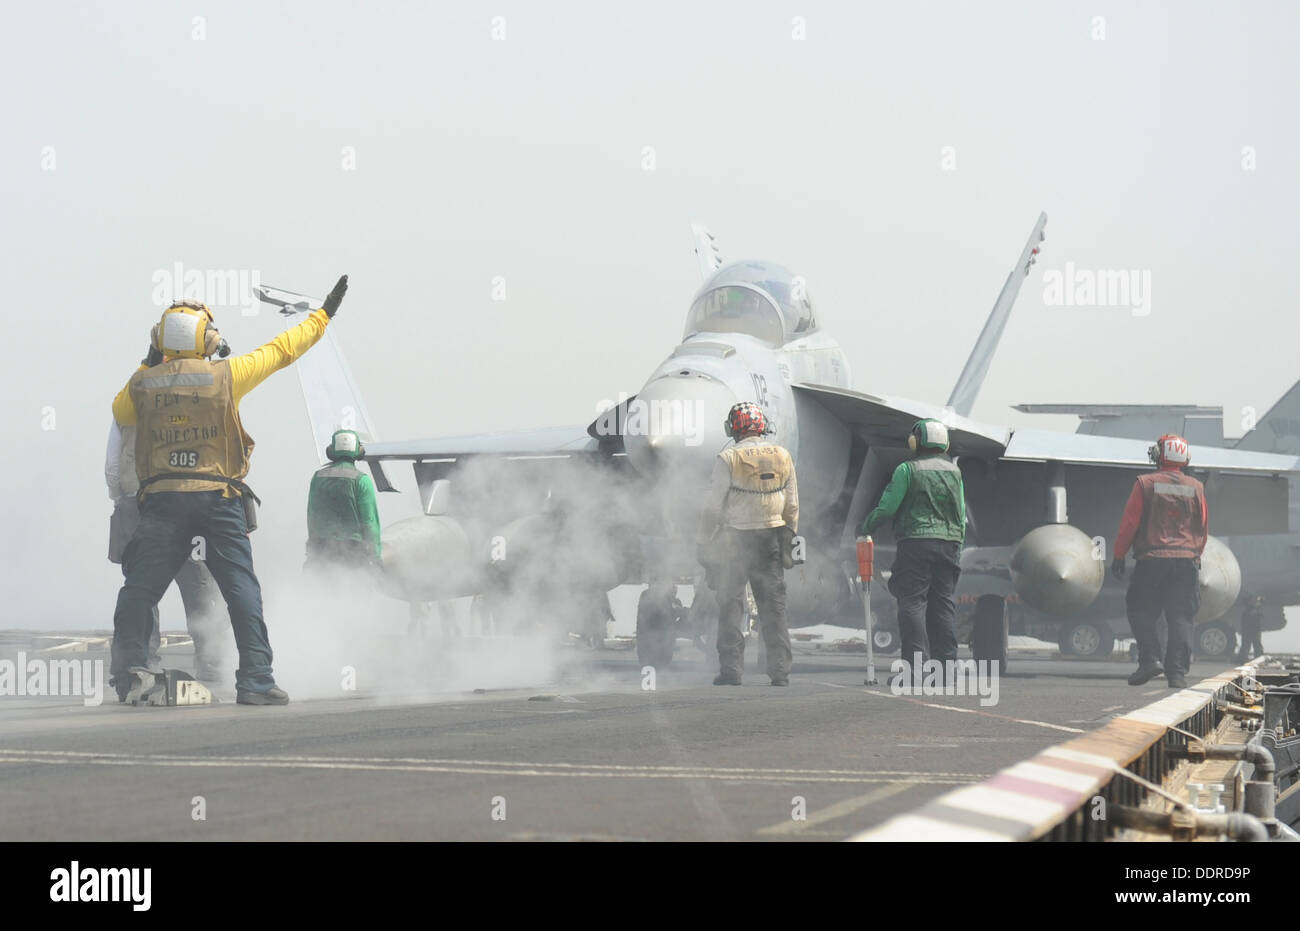 F/A-18F Super Hornet assigned to the Black Knights of Strike Fighter Squadron (VFA) 154 prepares to launch from the flight deck Stock Photo